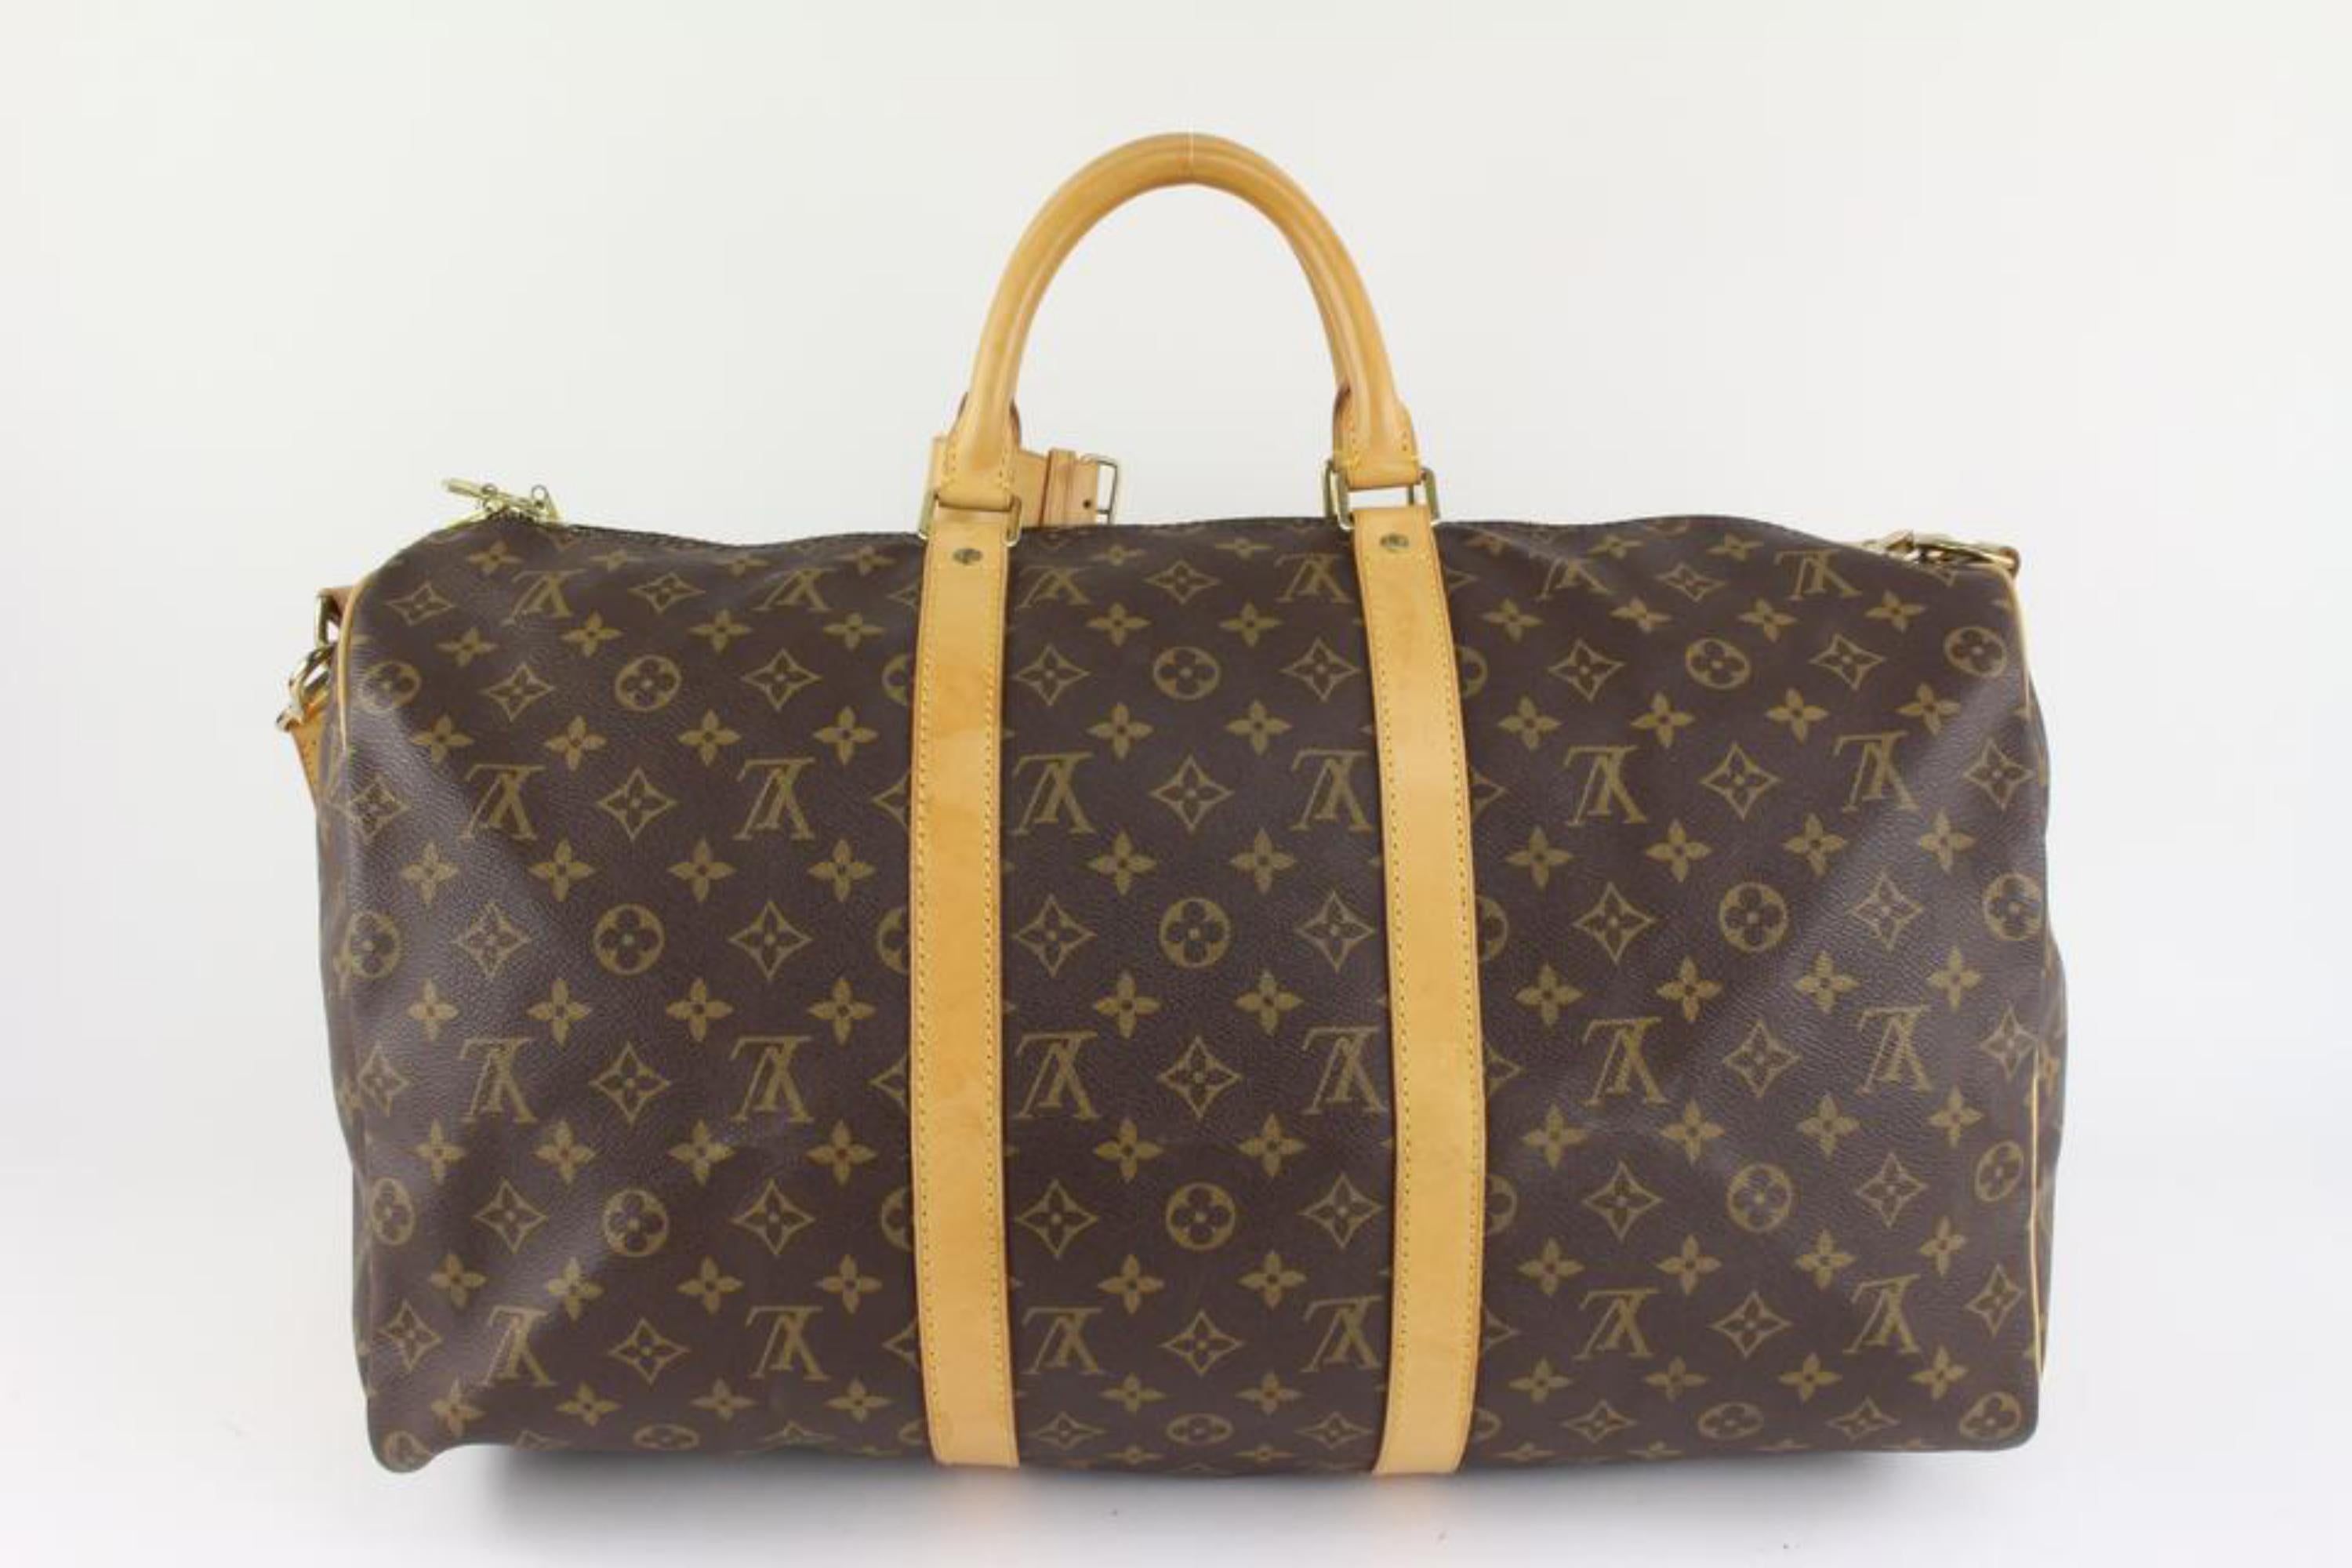 Louis Vuitton Monogram Keepall Bandouliere 45 Duffle Bag with Strap 1221lv15 3